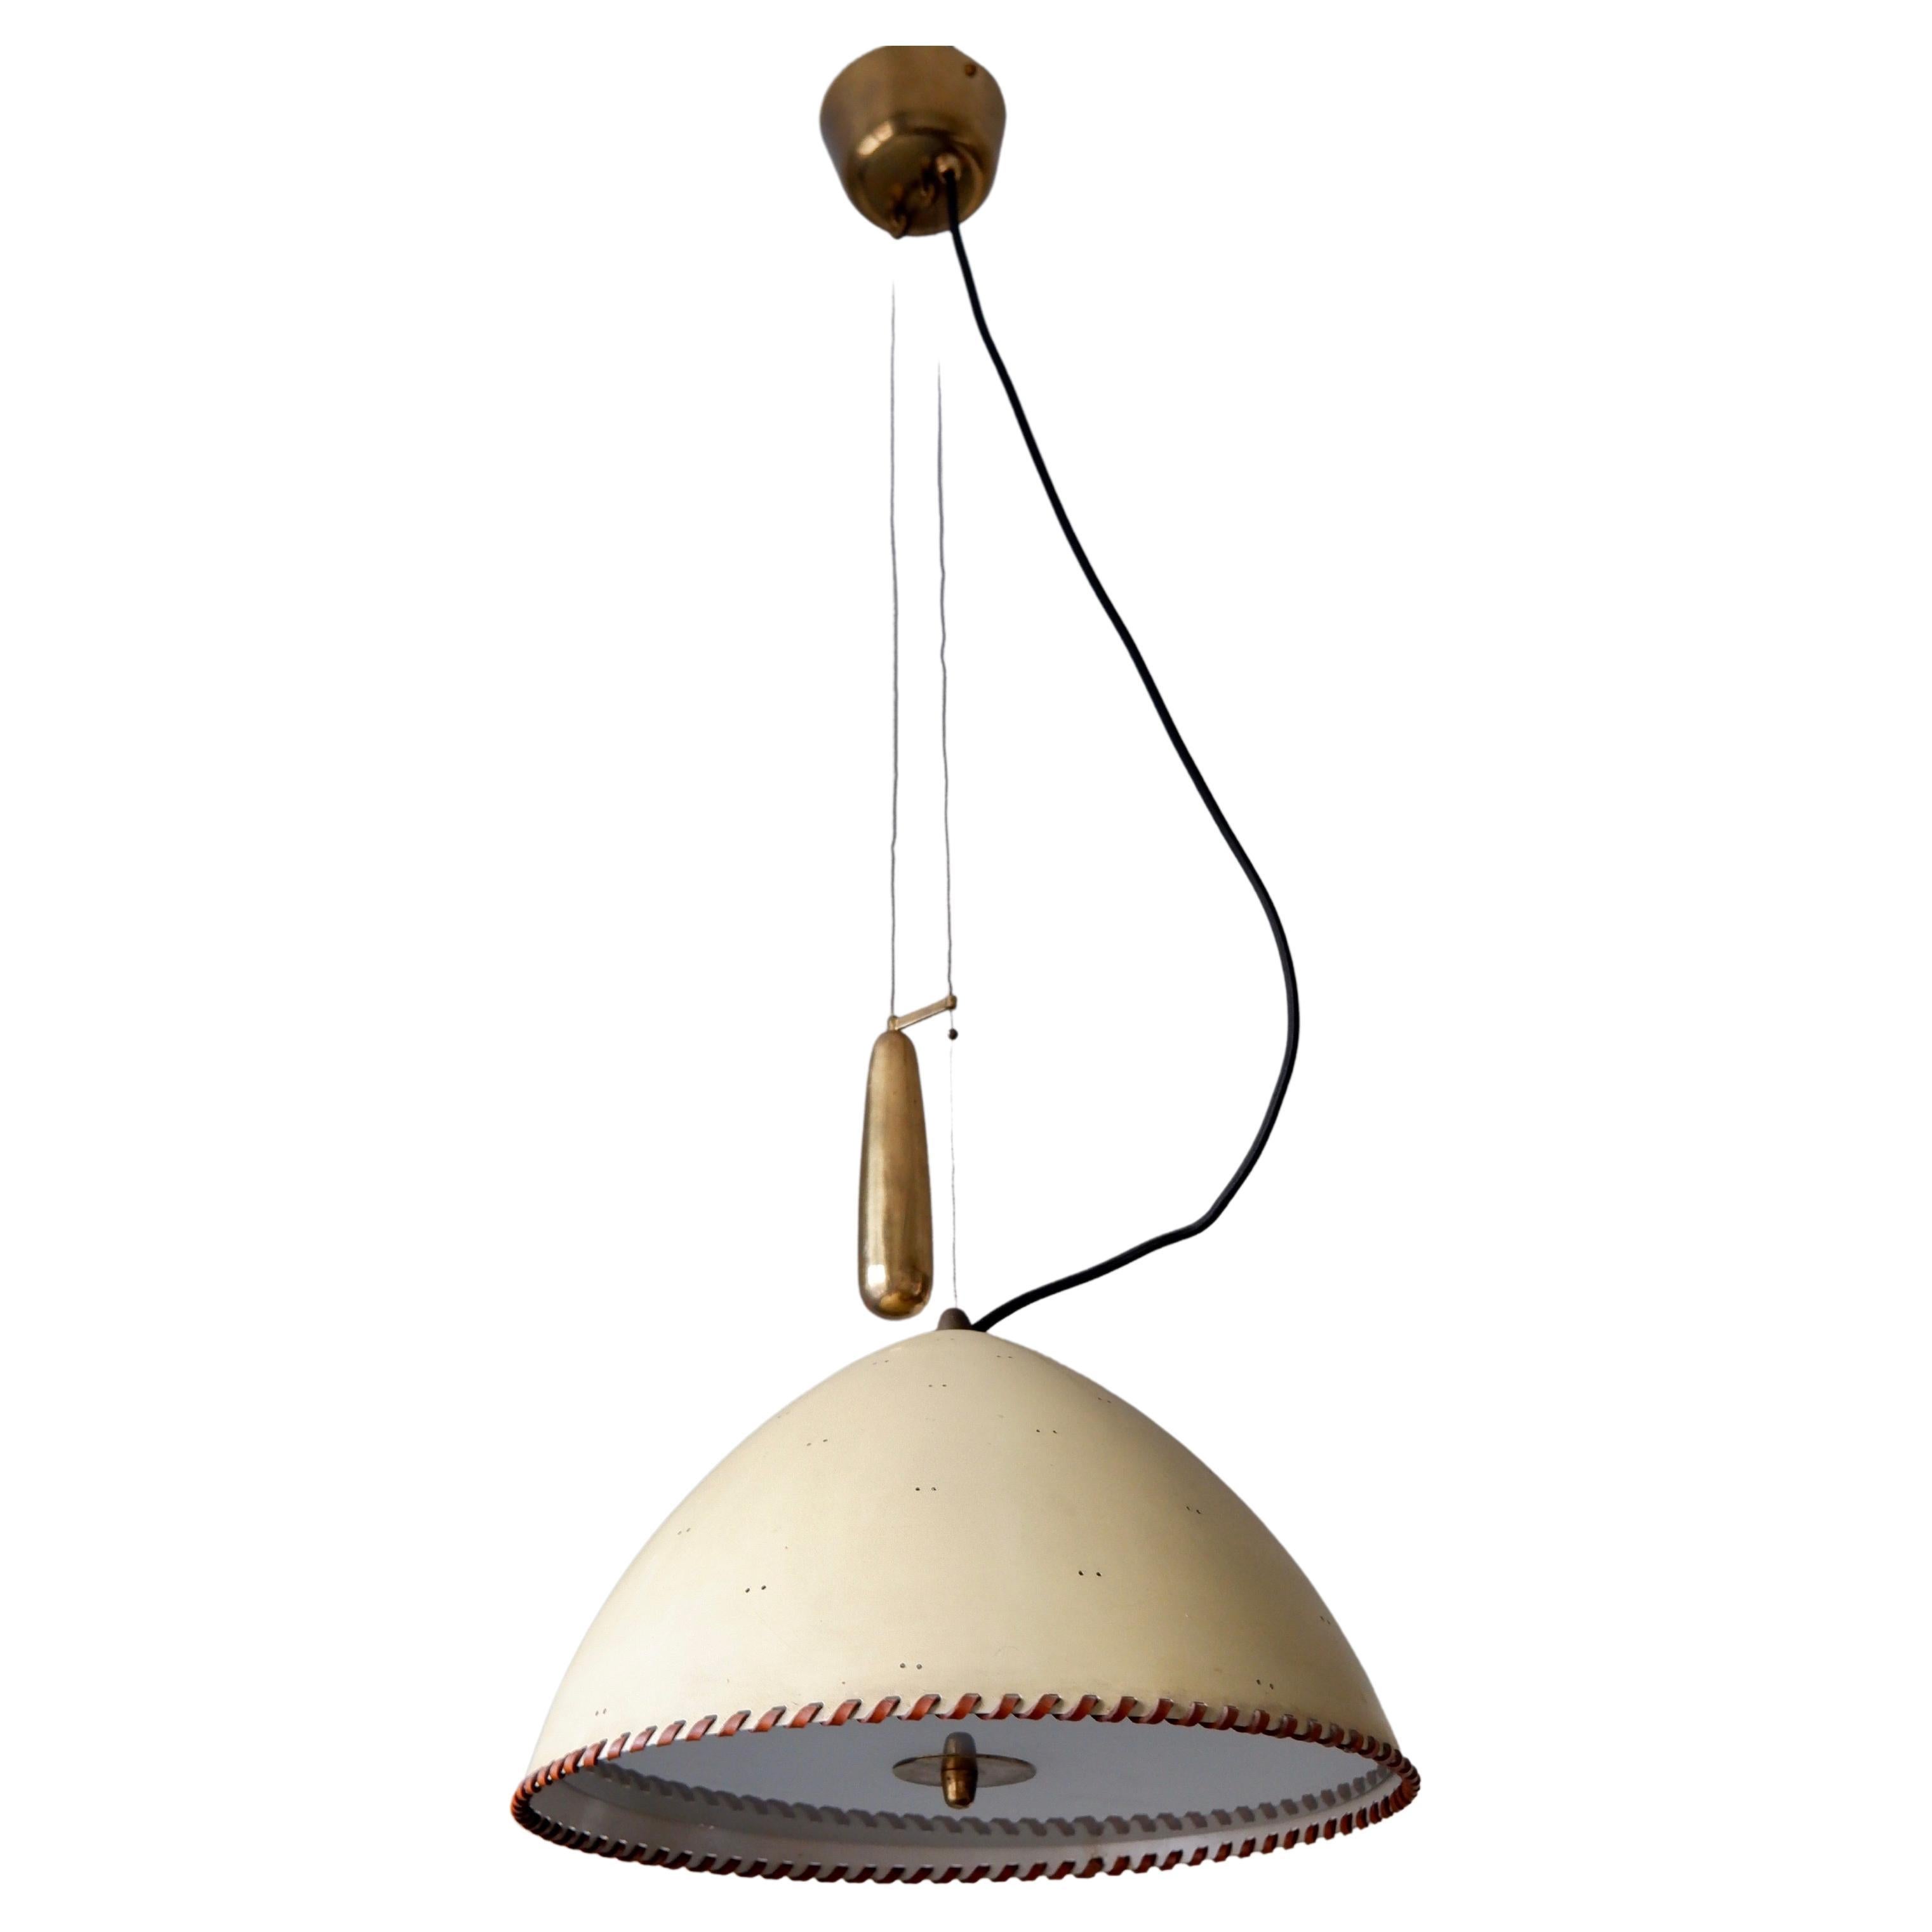 Paavo Tynell counter weight pendant light model a 1983, Taito OY, circa 1940